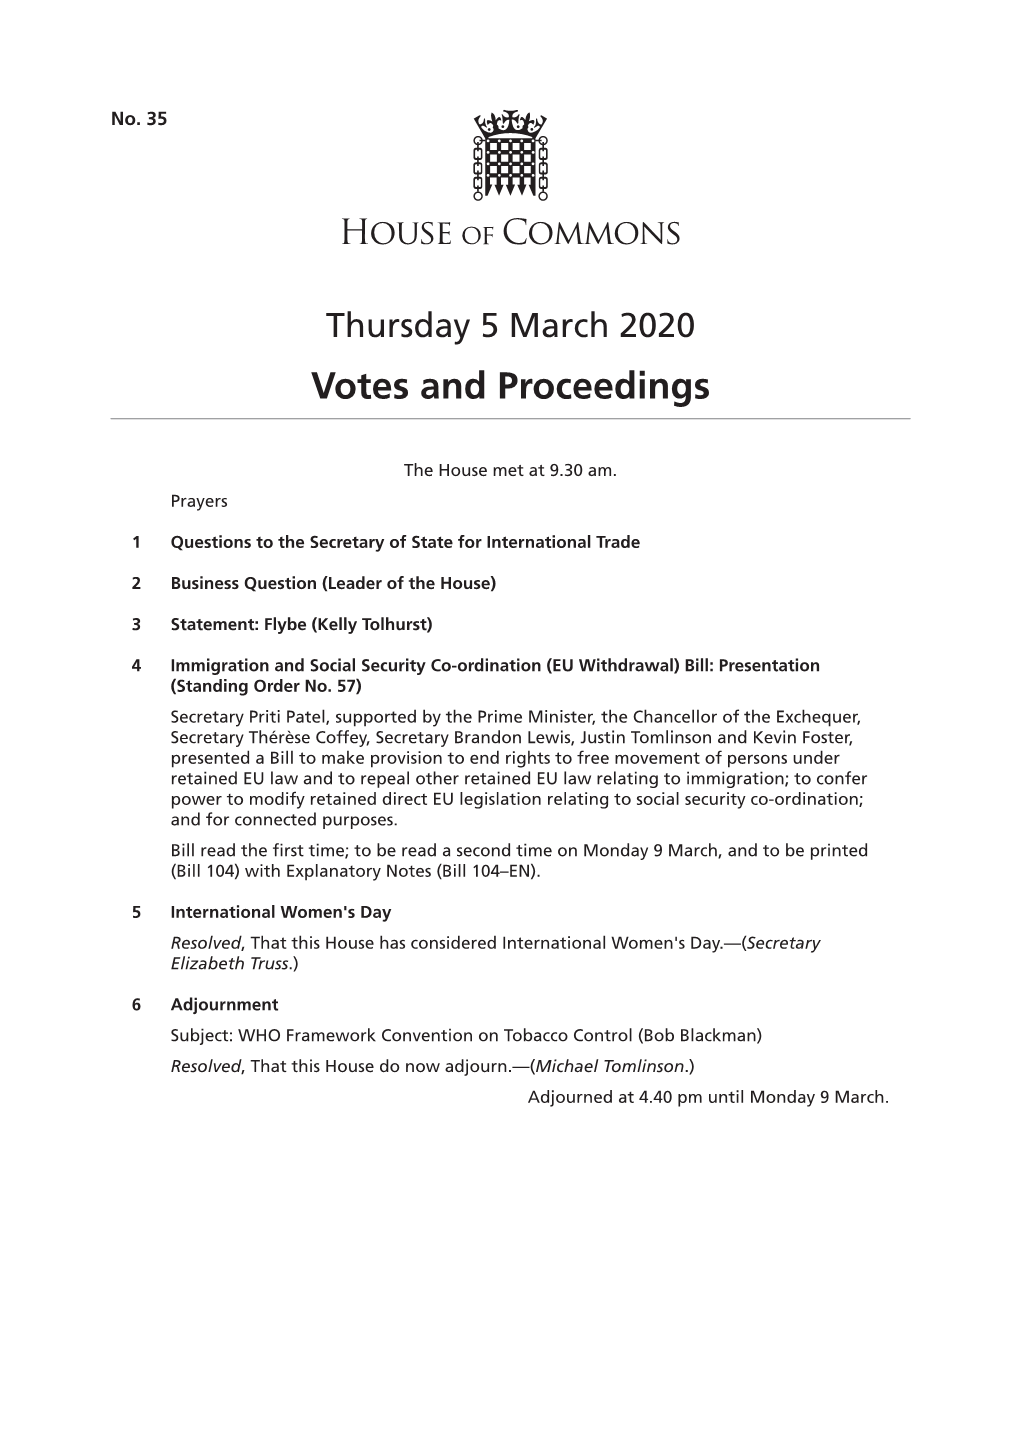 Votes and Proceedings for 5 Mar 2020